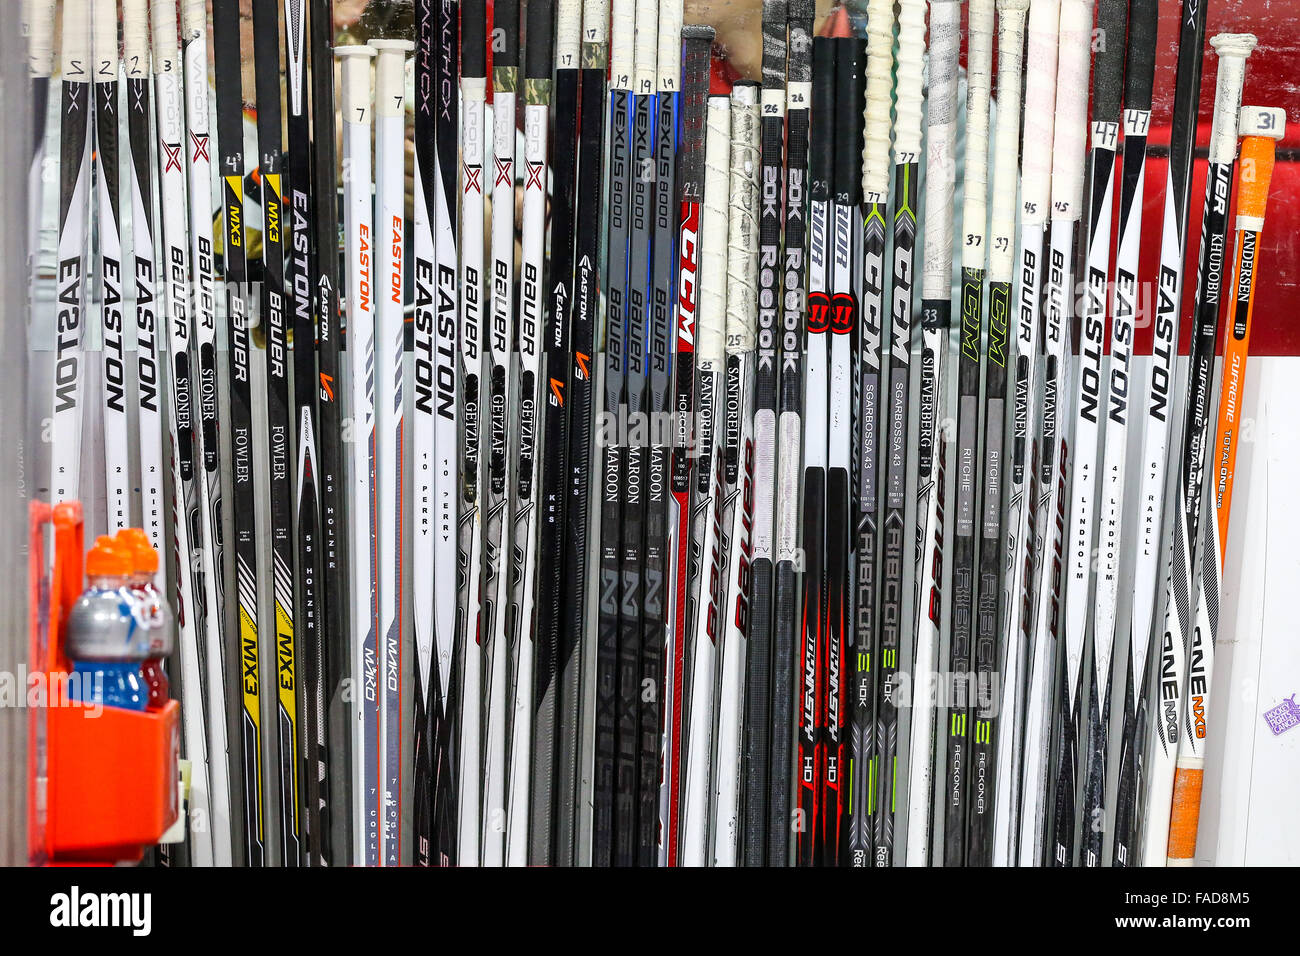 Anaheim Ducks hockey sticks during the NHL game between the Anaheim Ducks and the Carolina Hurricanes at the PNC Arena. Stock Photo